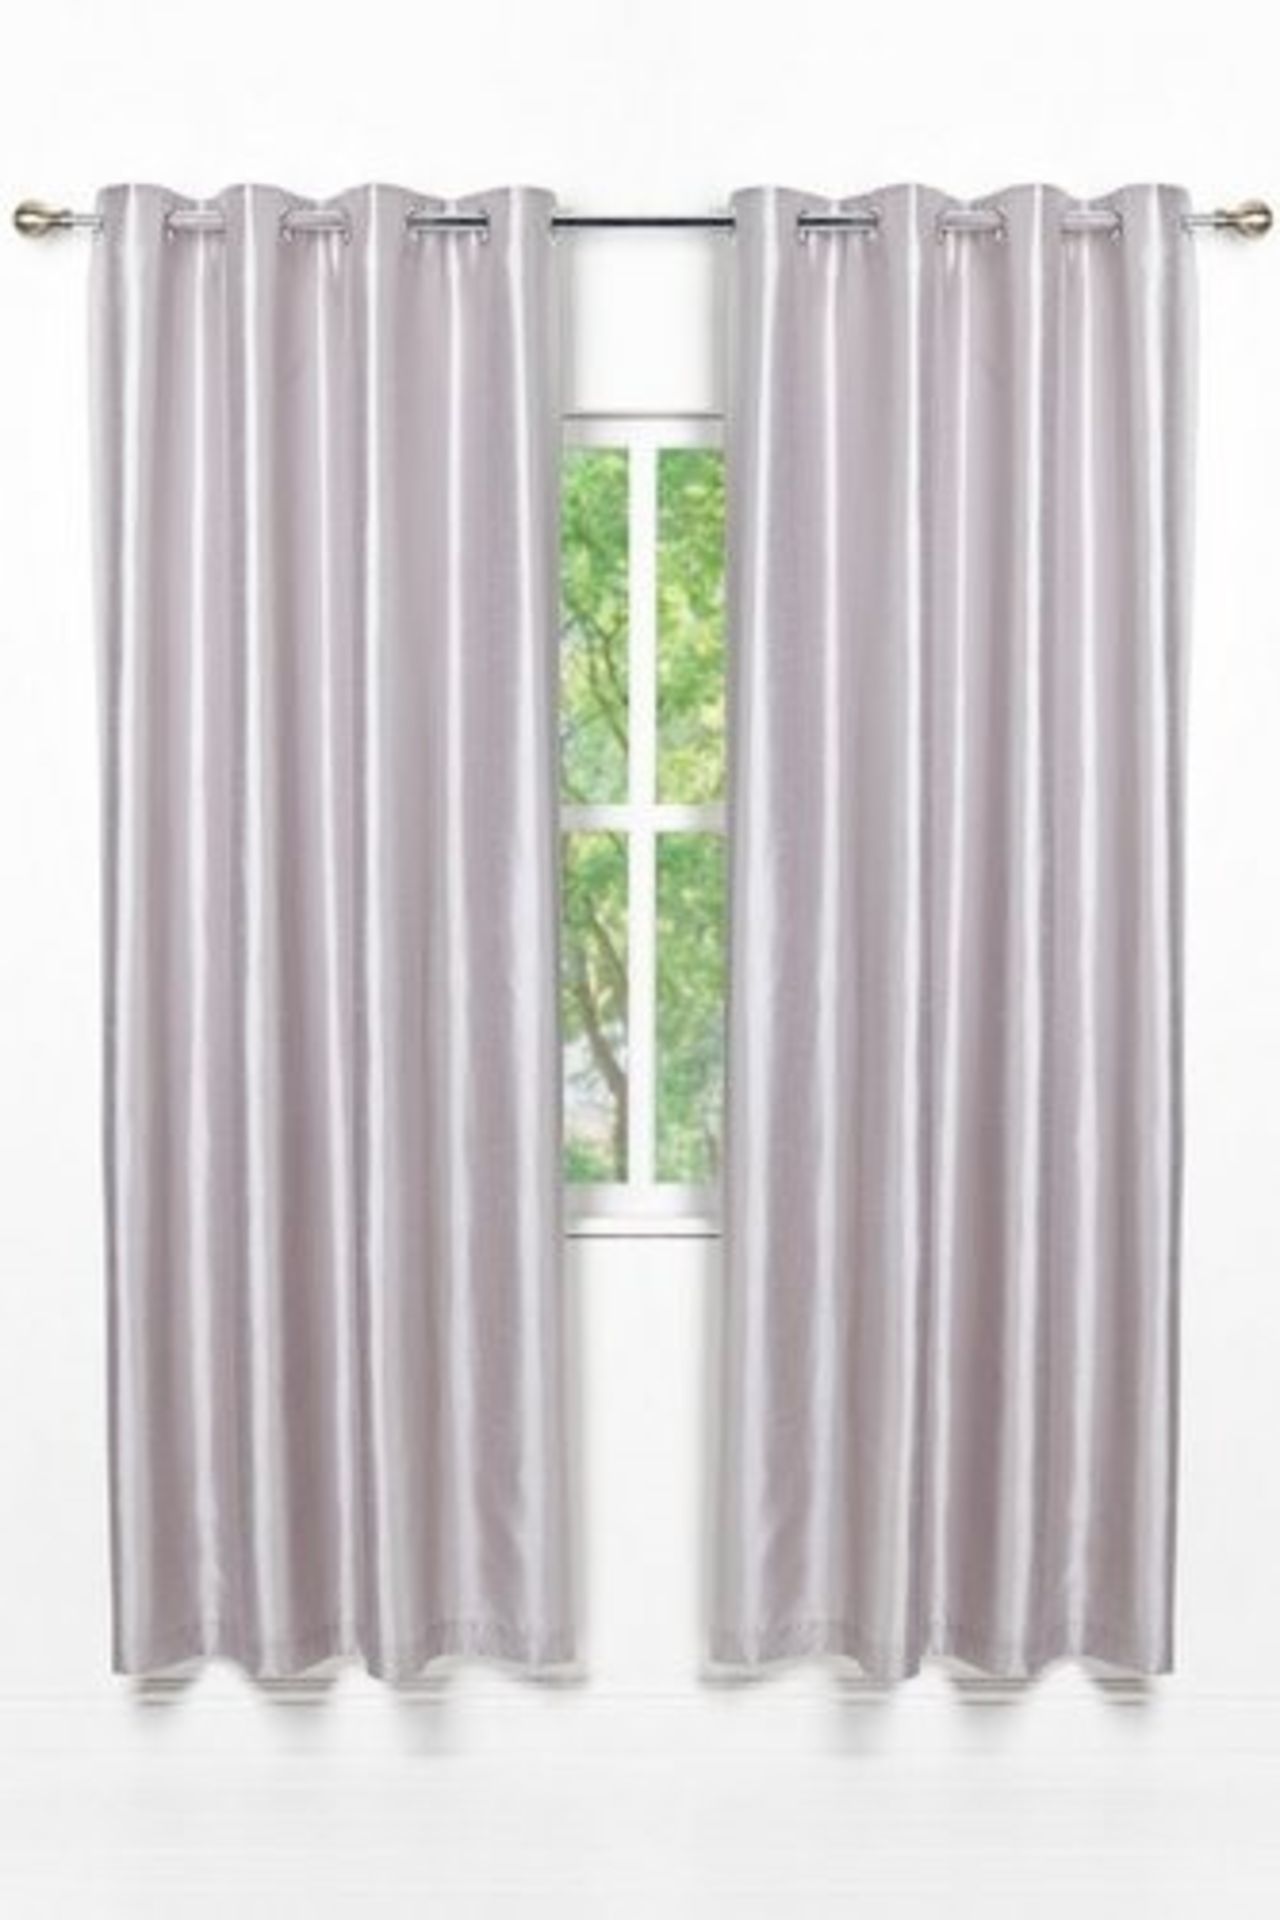 1 AS NEW PAIR OF FAUX SILK EYELET CURTAINS IN SILVER 66 X54 (VIEWING HIGHLY RECOMMENDED)